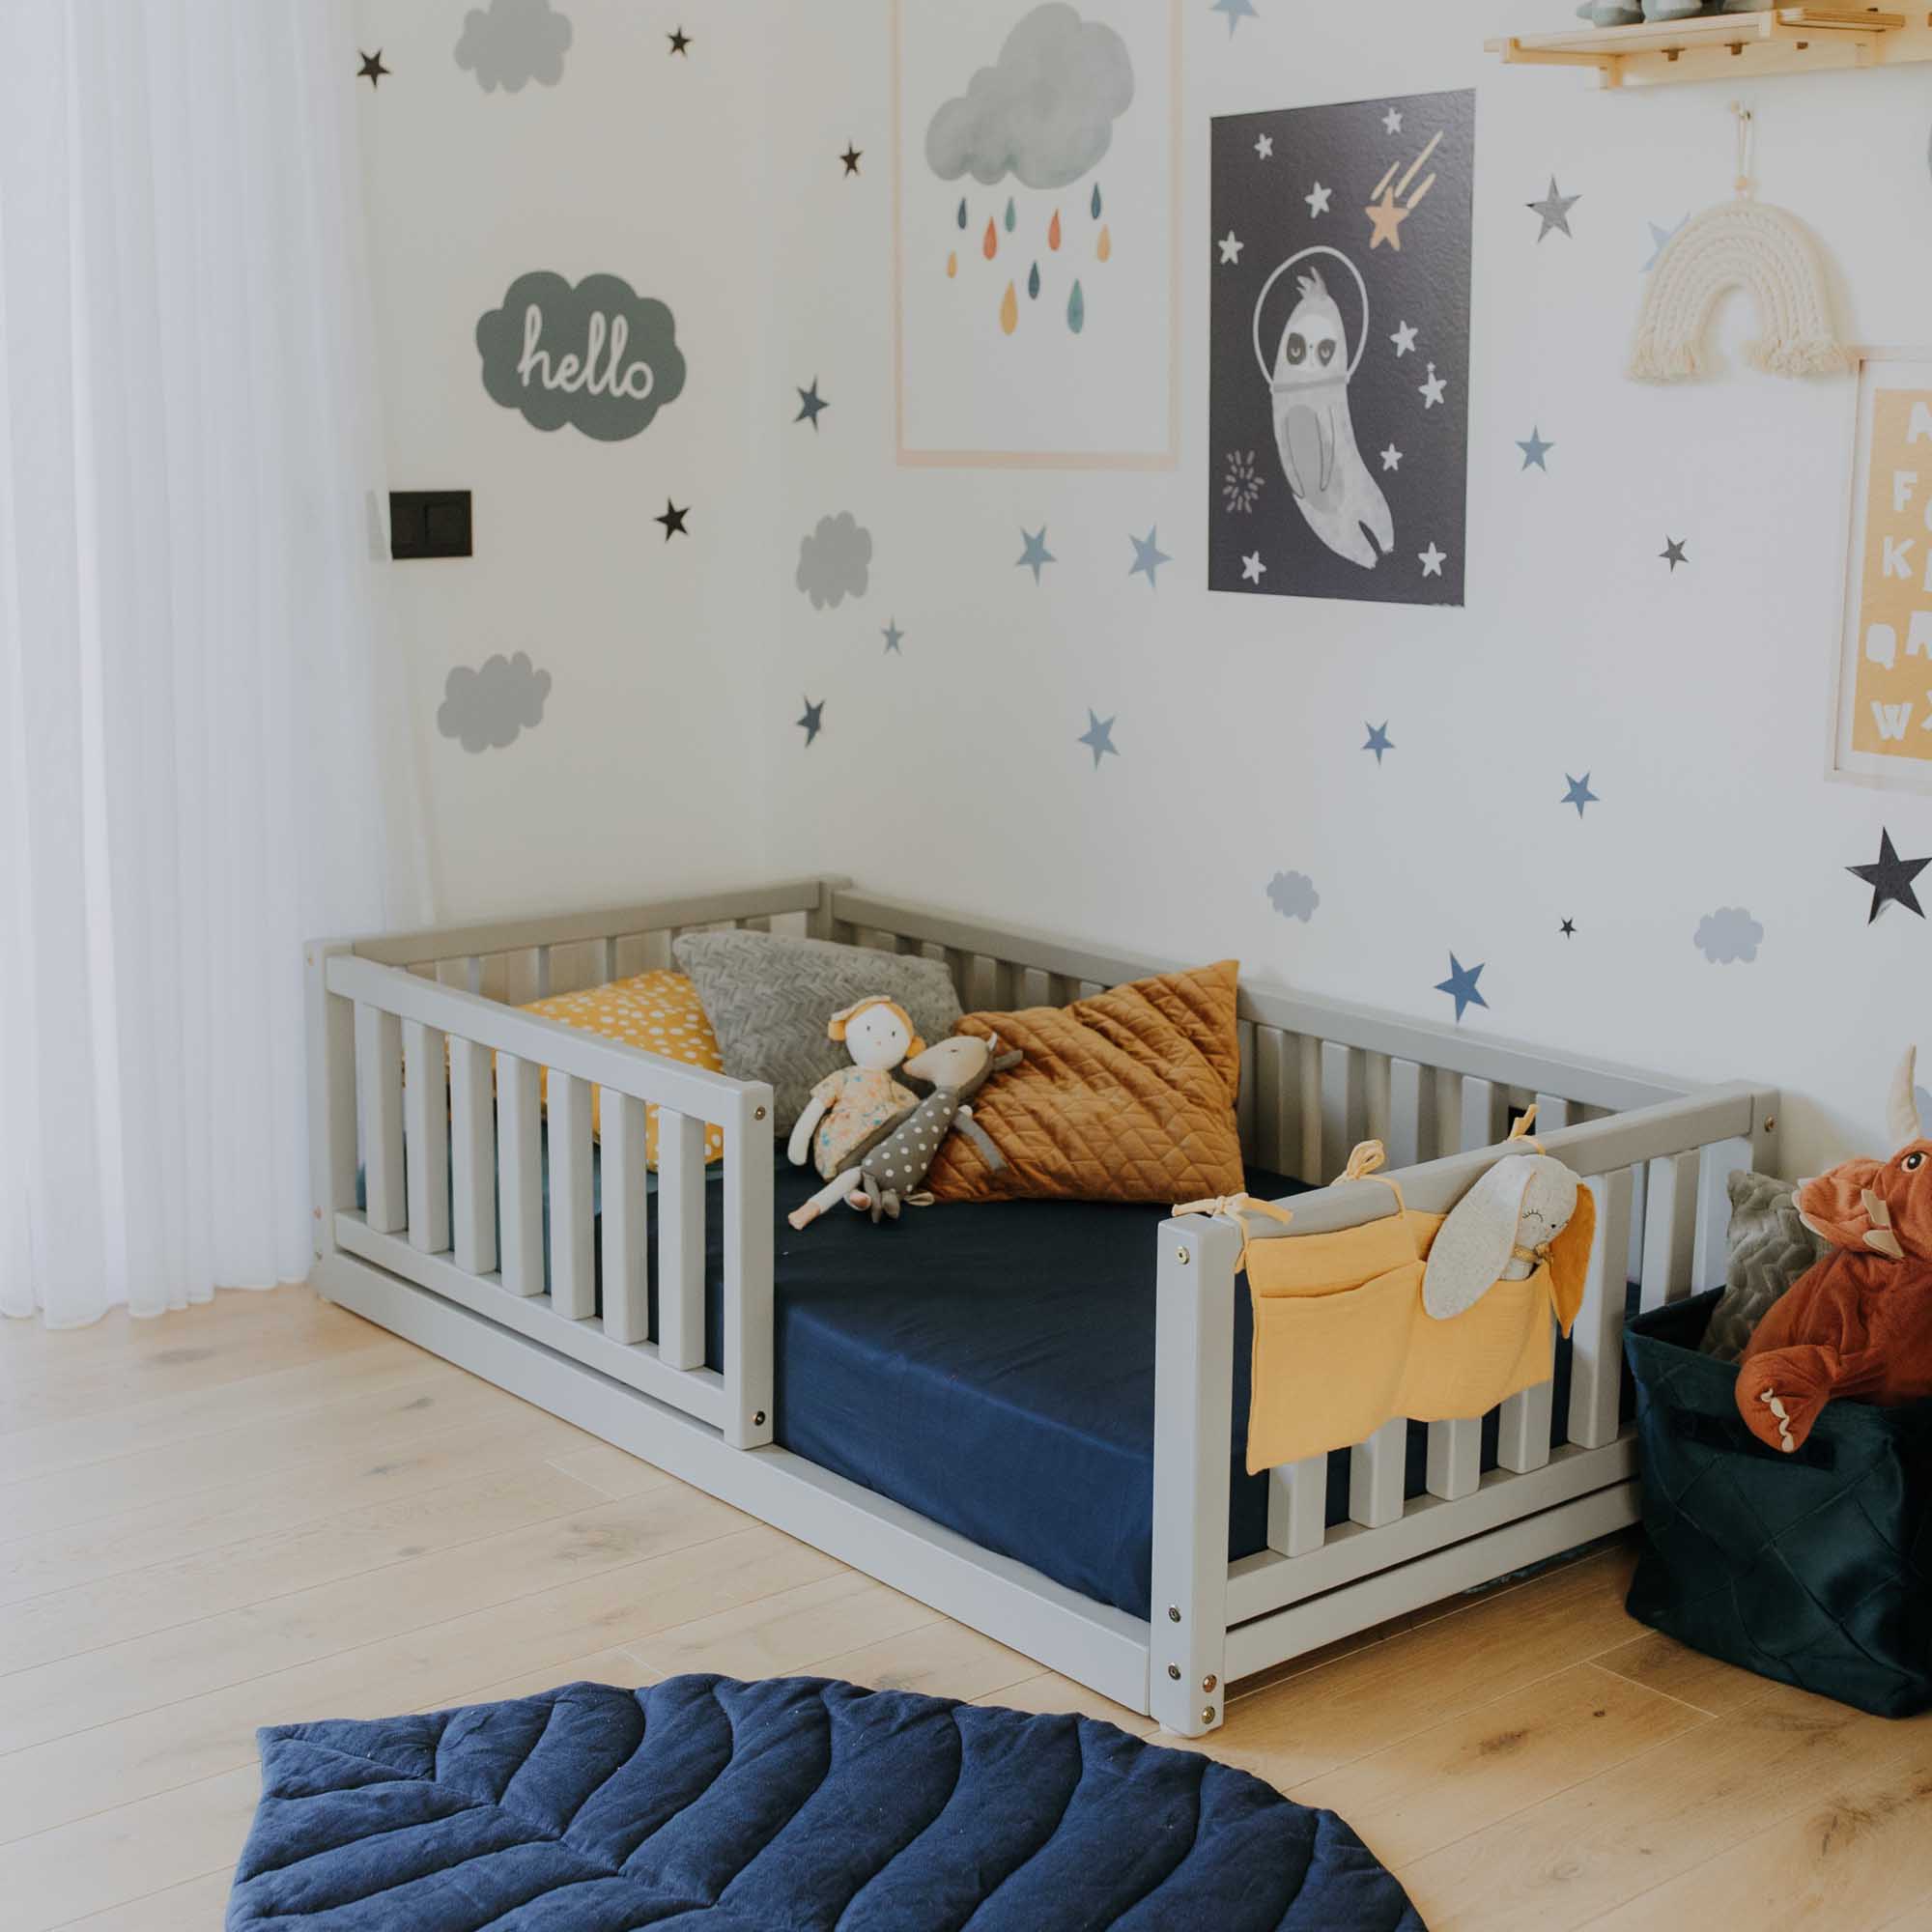 A child's room with a bed and a blue rug.